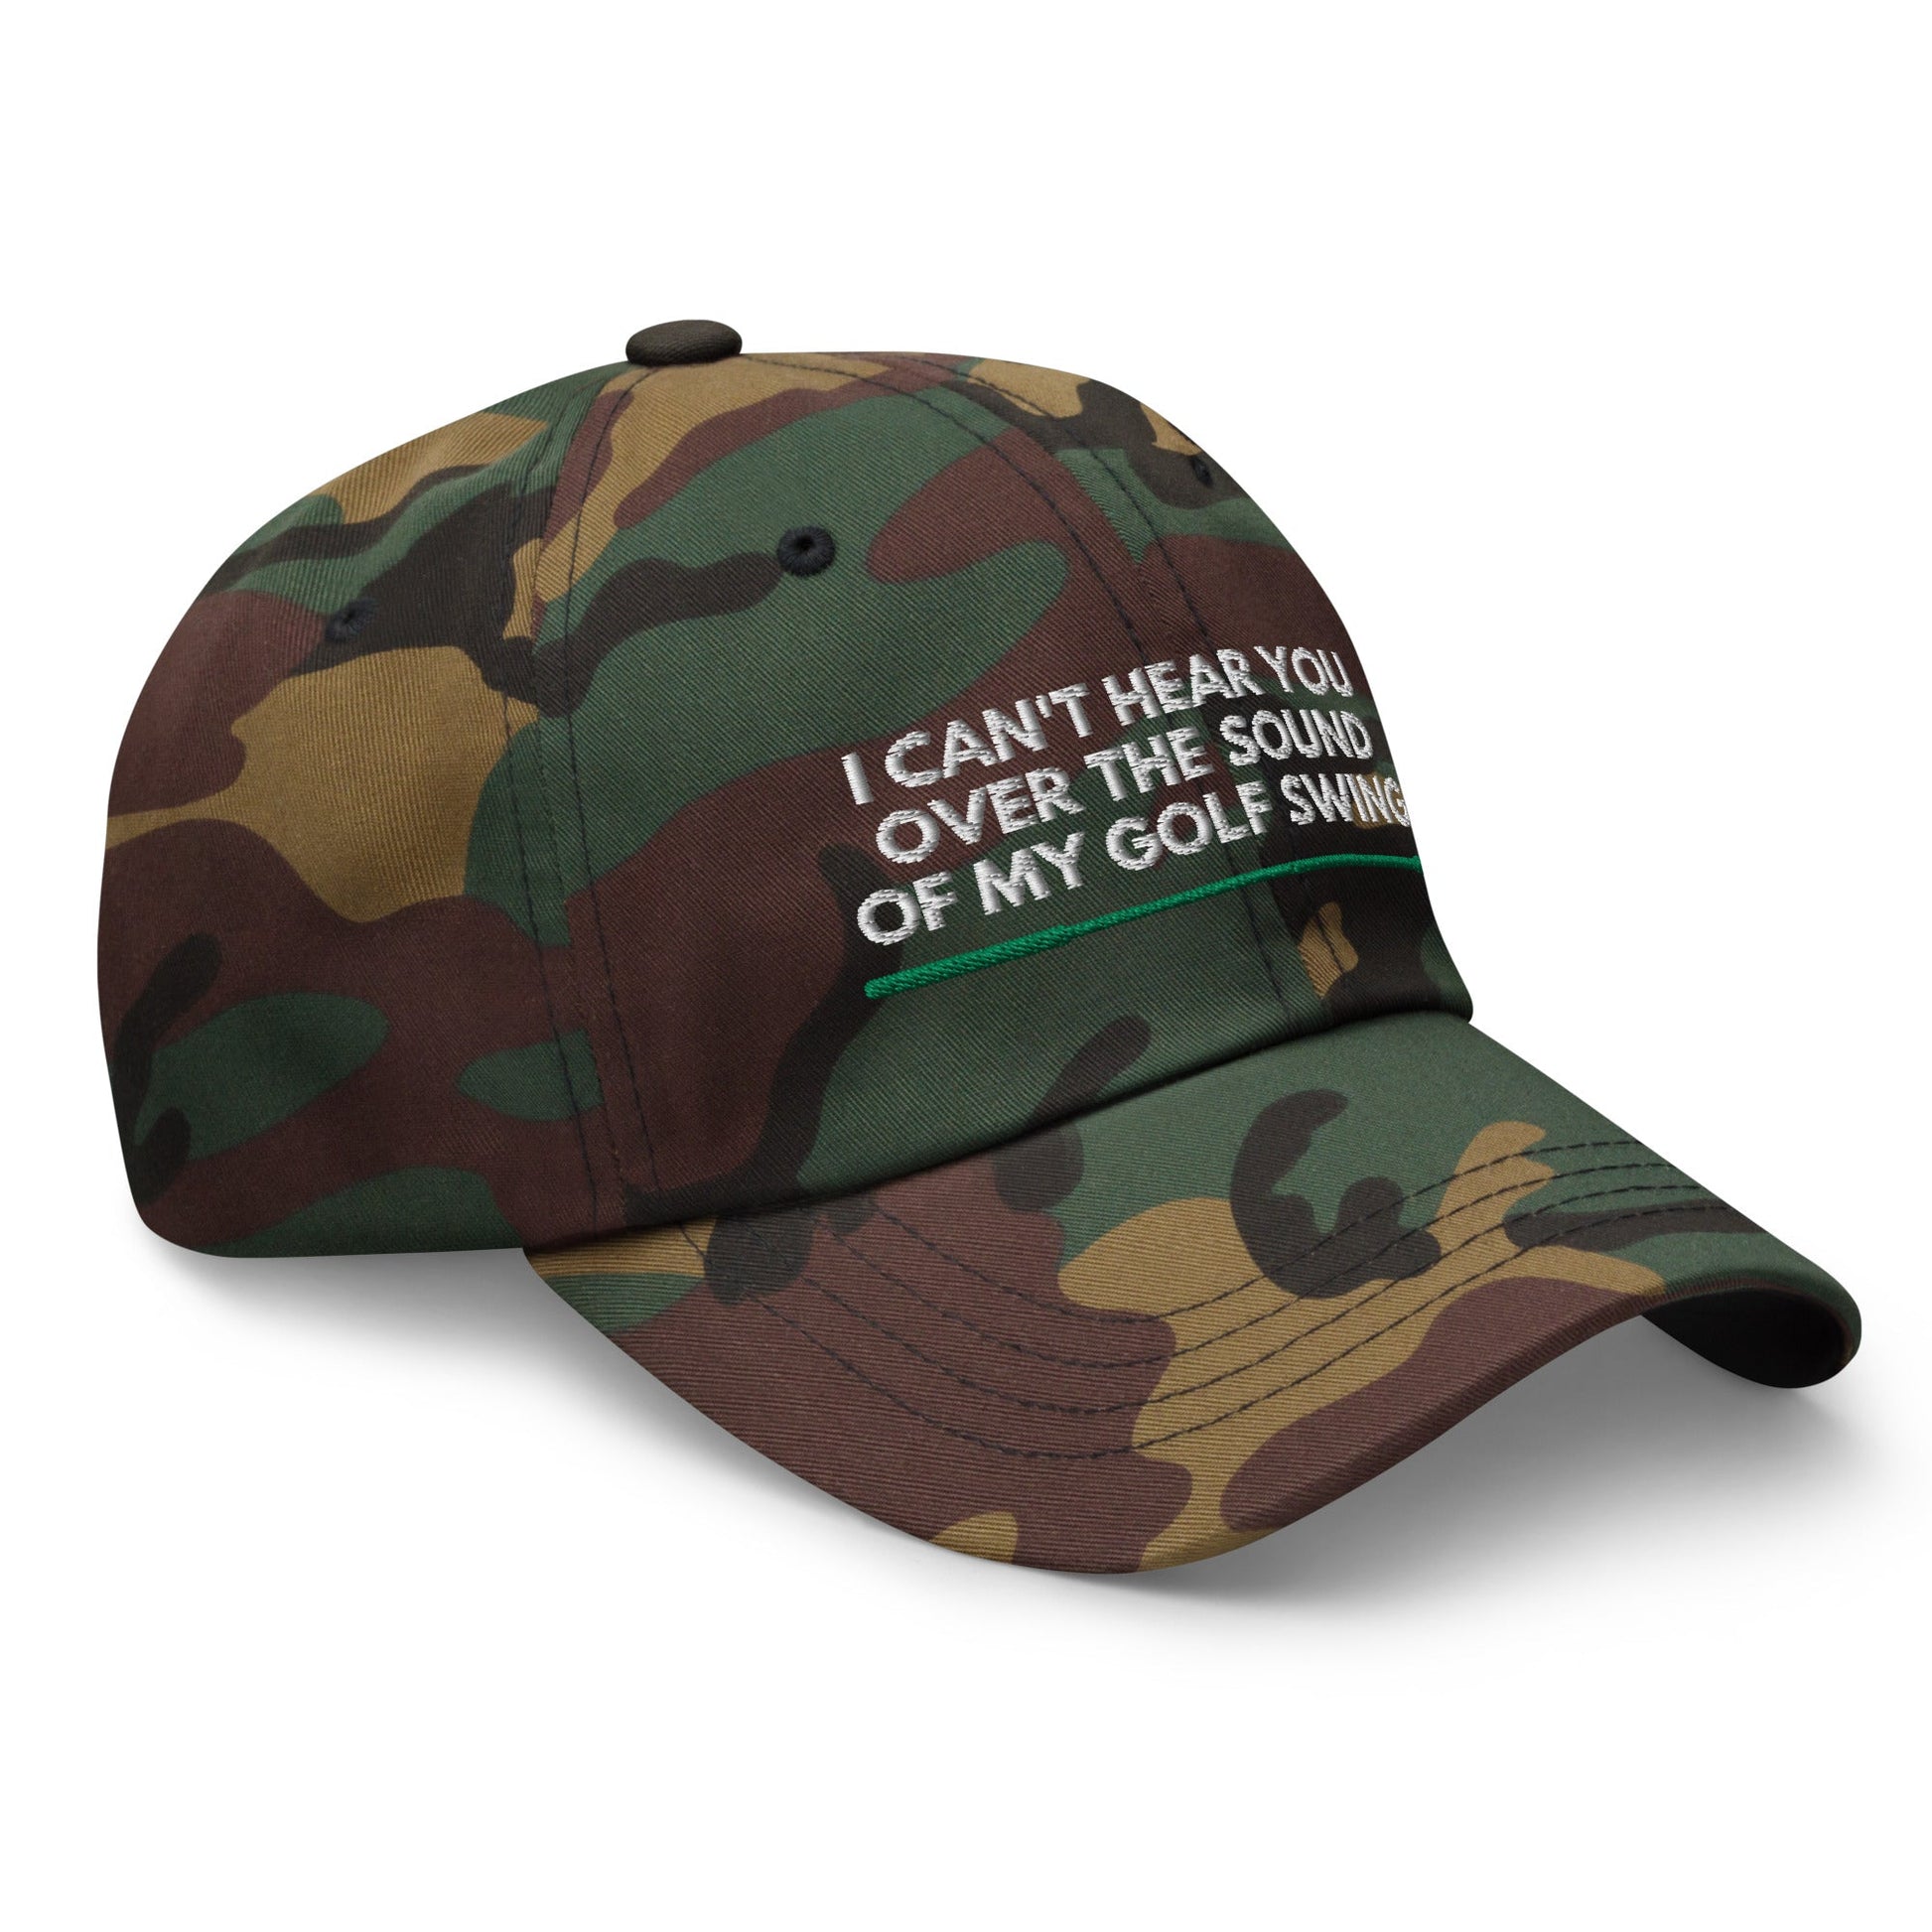 Funny Golfer Gifts  Dad Cap Green Camo I Cant Hear You Over The Sound Of My Golf Swing Hat Cap